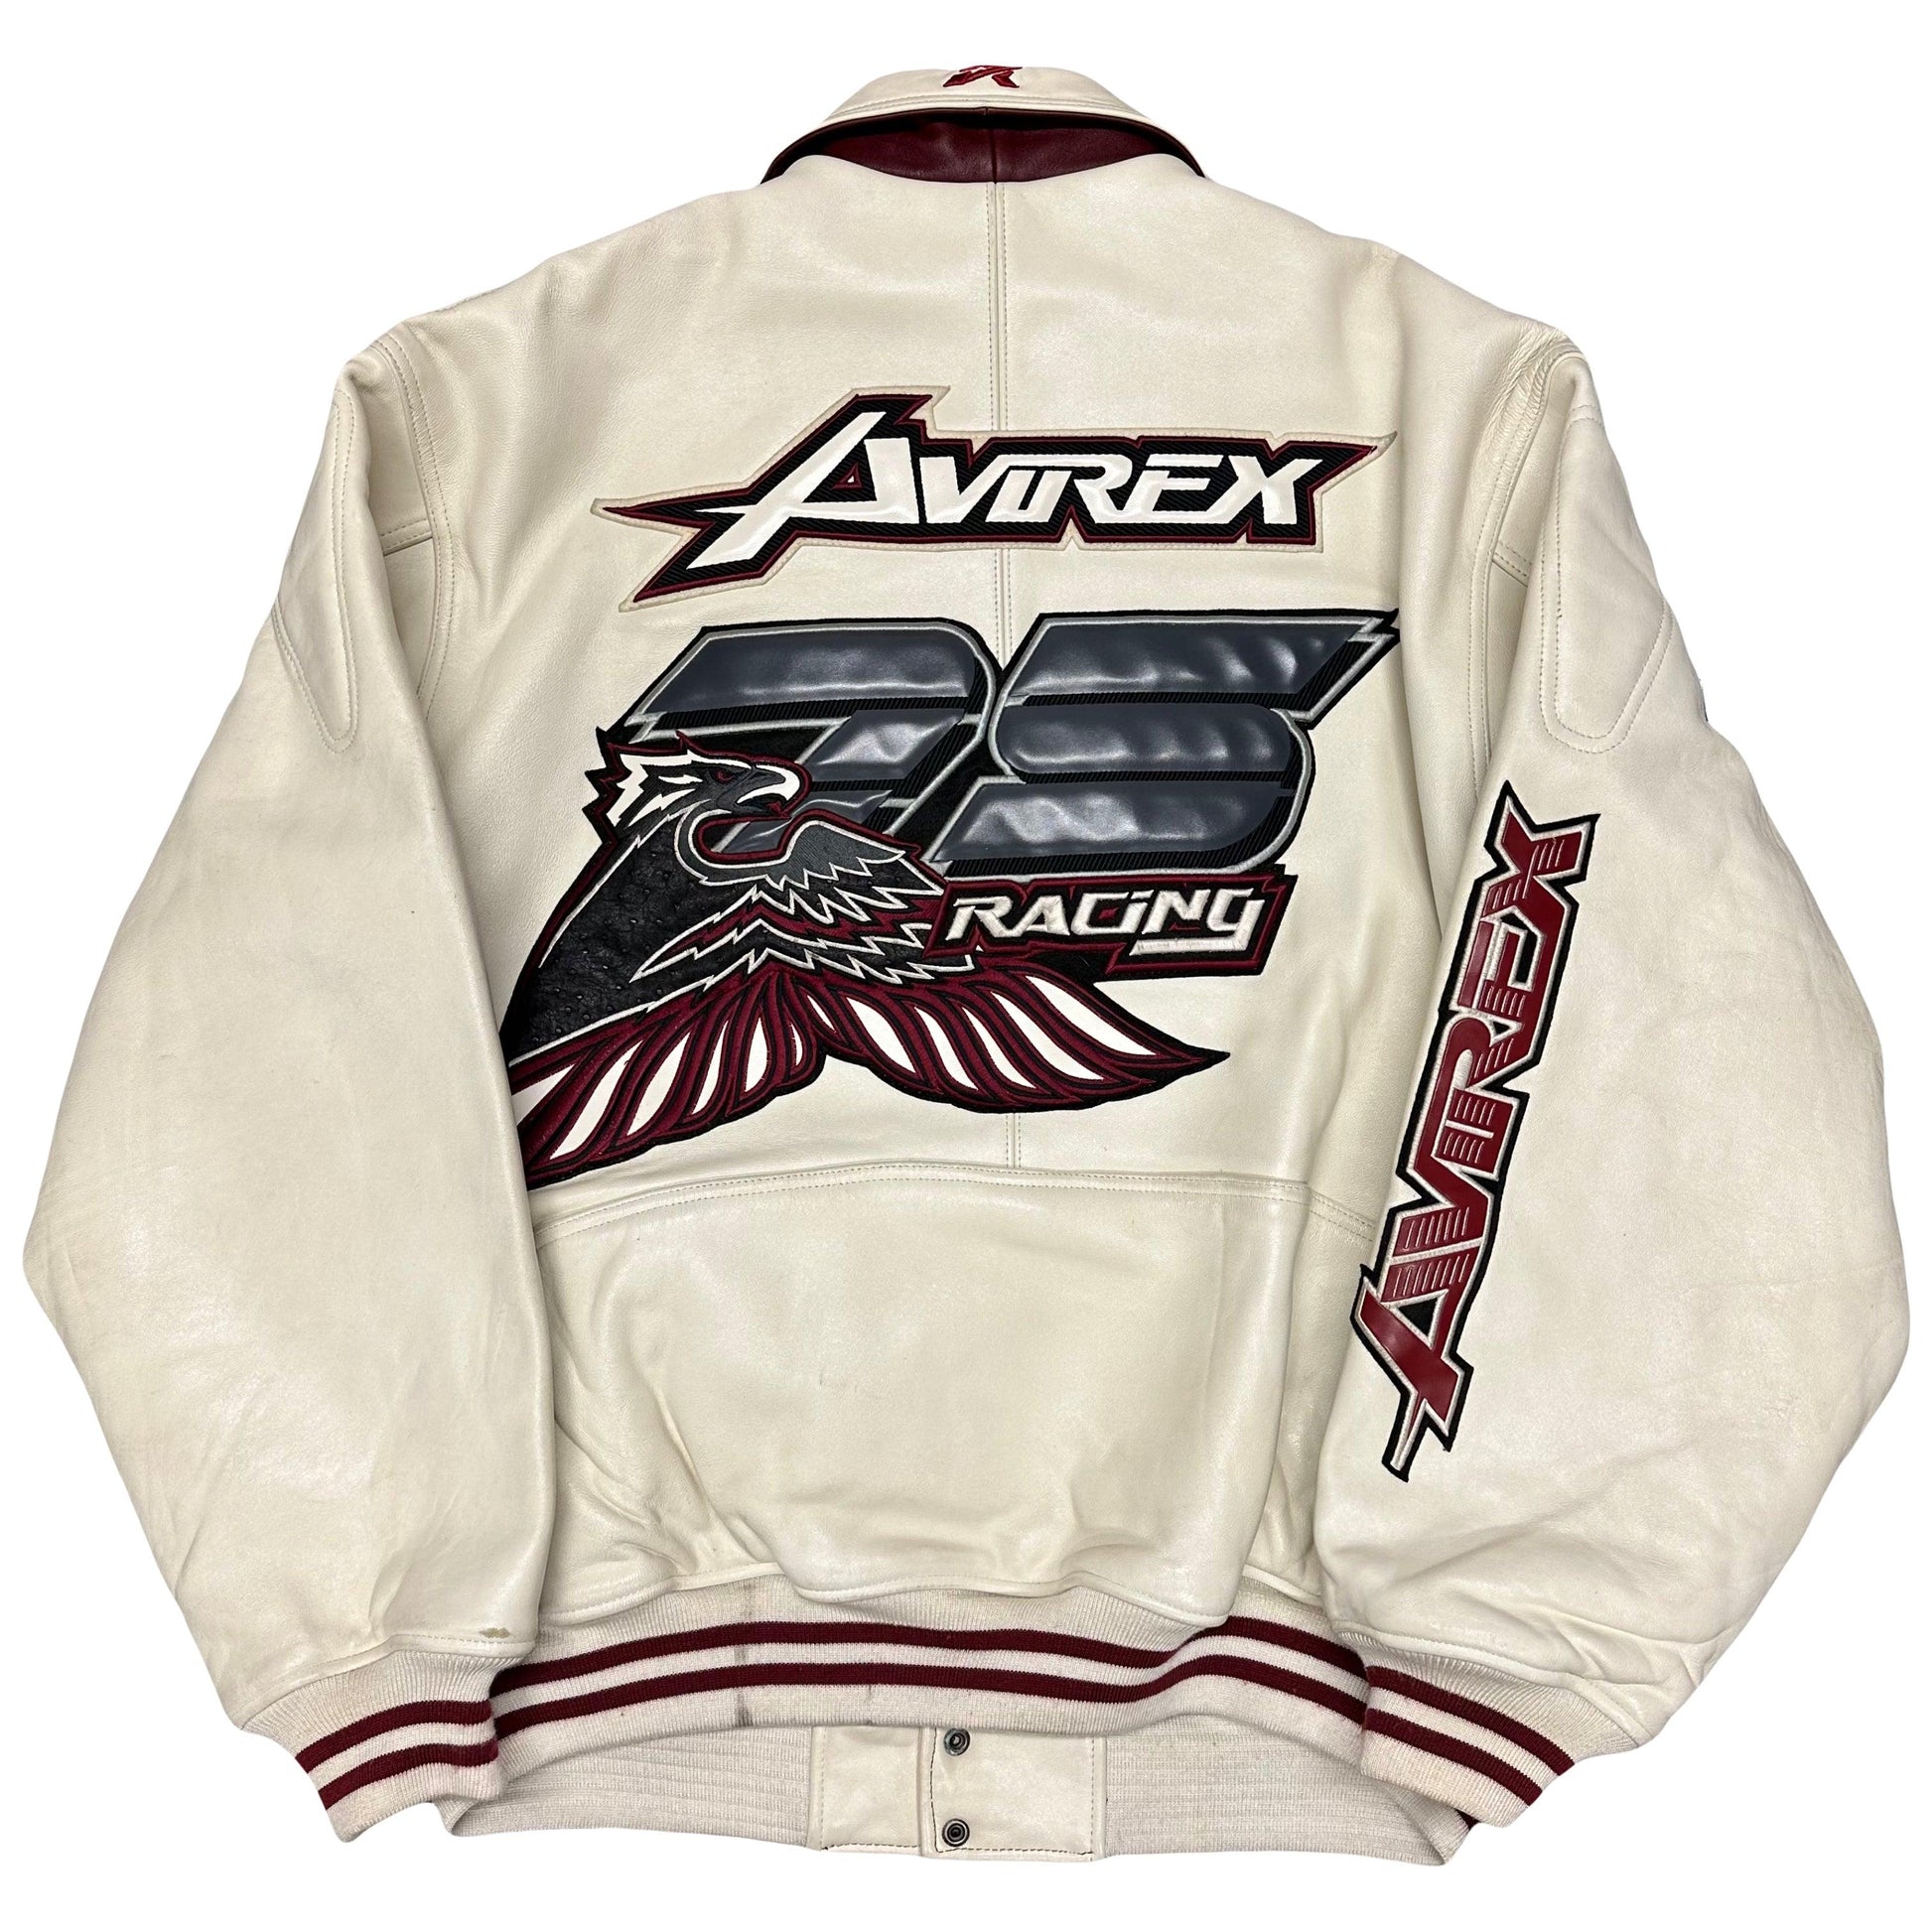 ARCHIVE Avirex Racing Leather Jacket ( XXL ) - Known Source